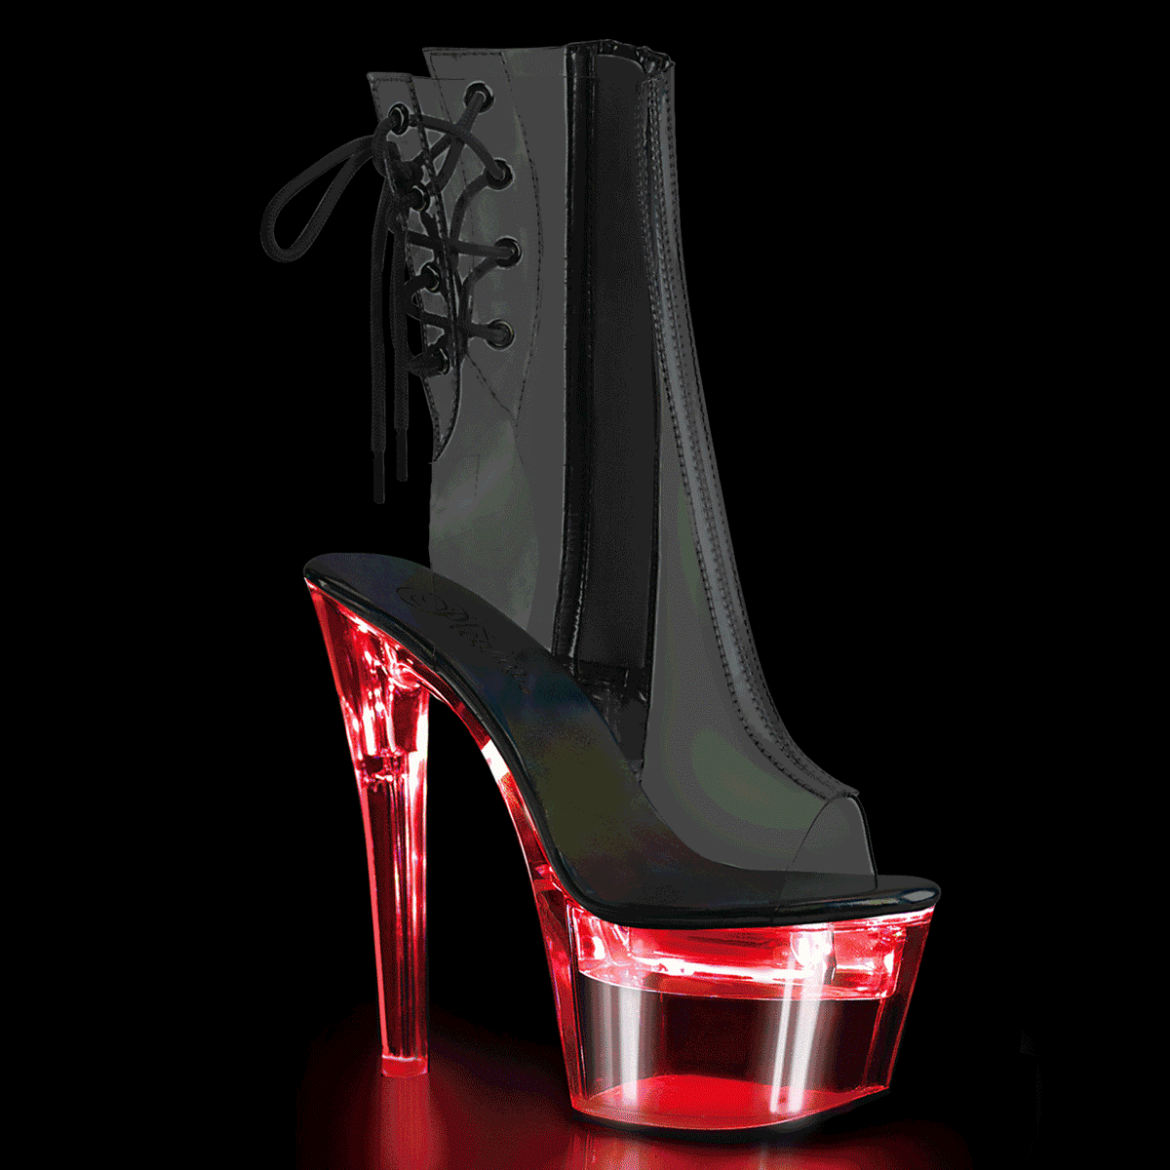 Product image of Pleaser Flashdance-1018C-7 Clear/Clear, 7 inch (17.8 cm) Heel, 2 3/4 inch (7 cm) Platform Ankle Boot